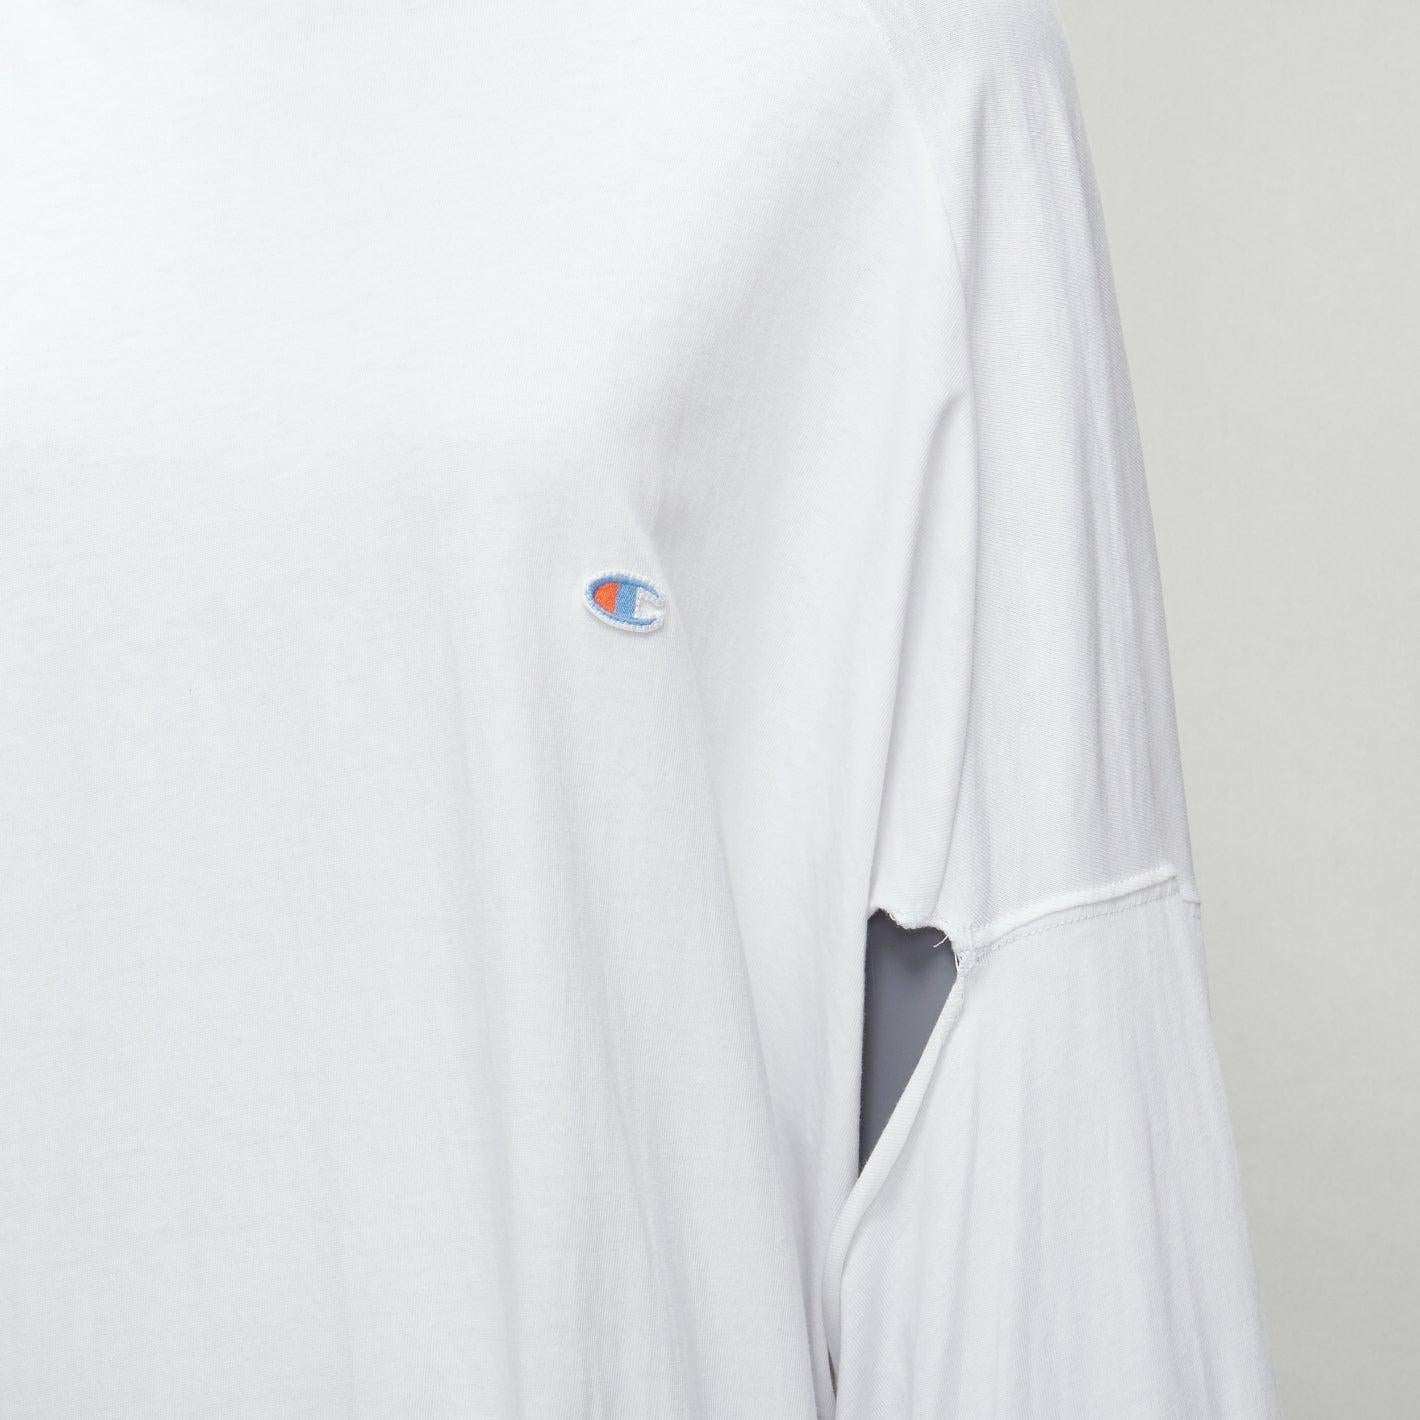 VETEMENTS CHAMPION white logo tape deconstructed cut out sleeve sweater S
Reference: TGAS/D00650
Brand: Vetements
Collection: Champion
Material: Cotton
Color: White, Multicolour
Pattern: Solid
Closure: Pullover
Extra Details: Dropped armhole. Cut